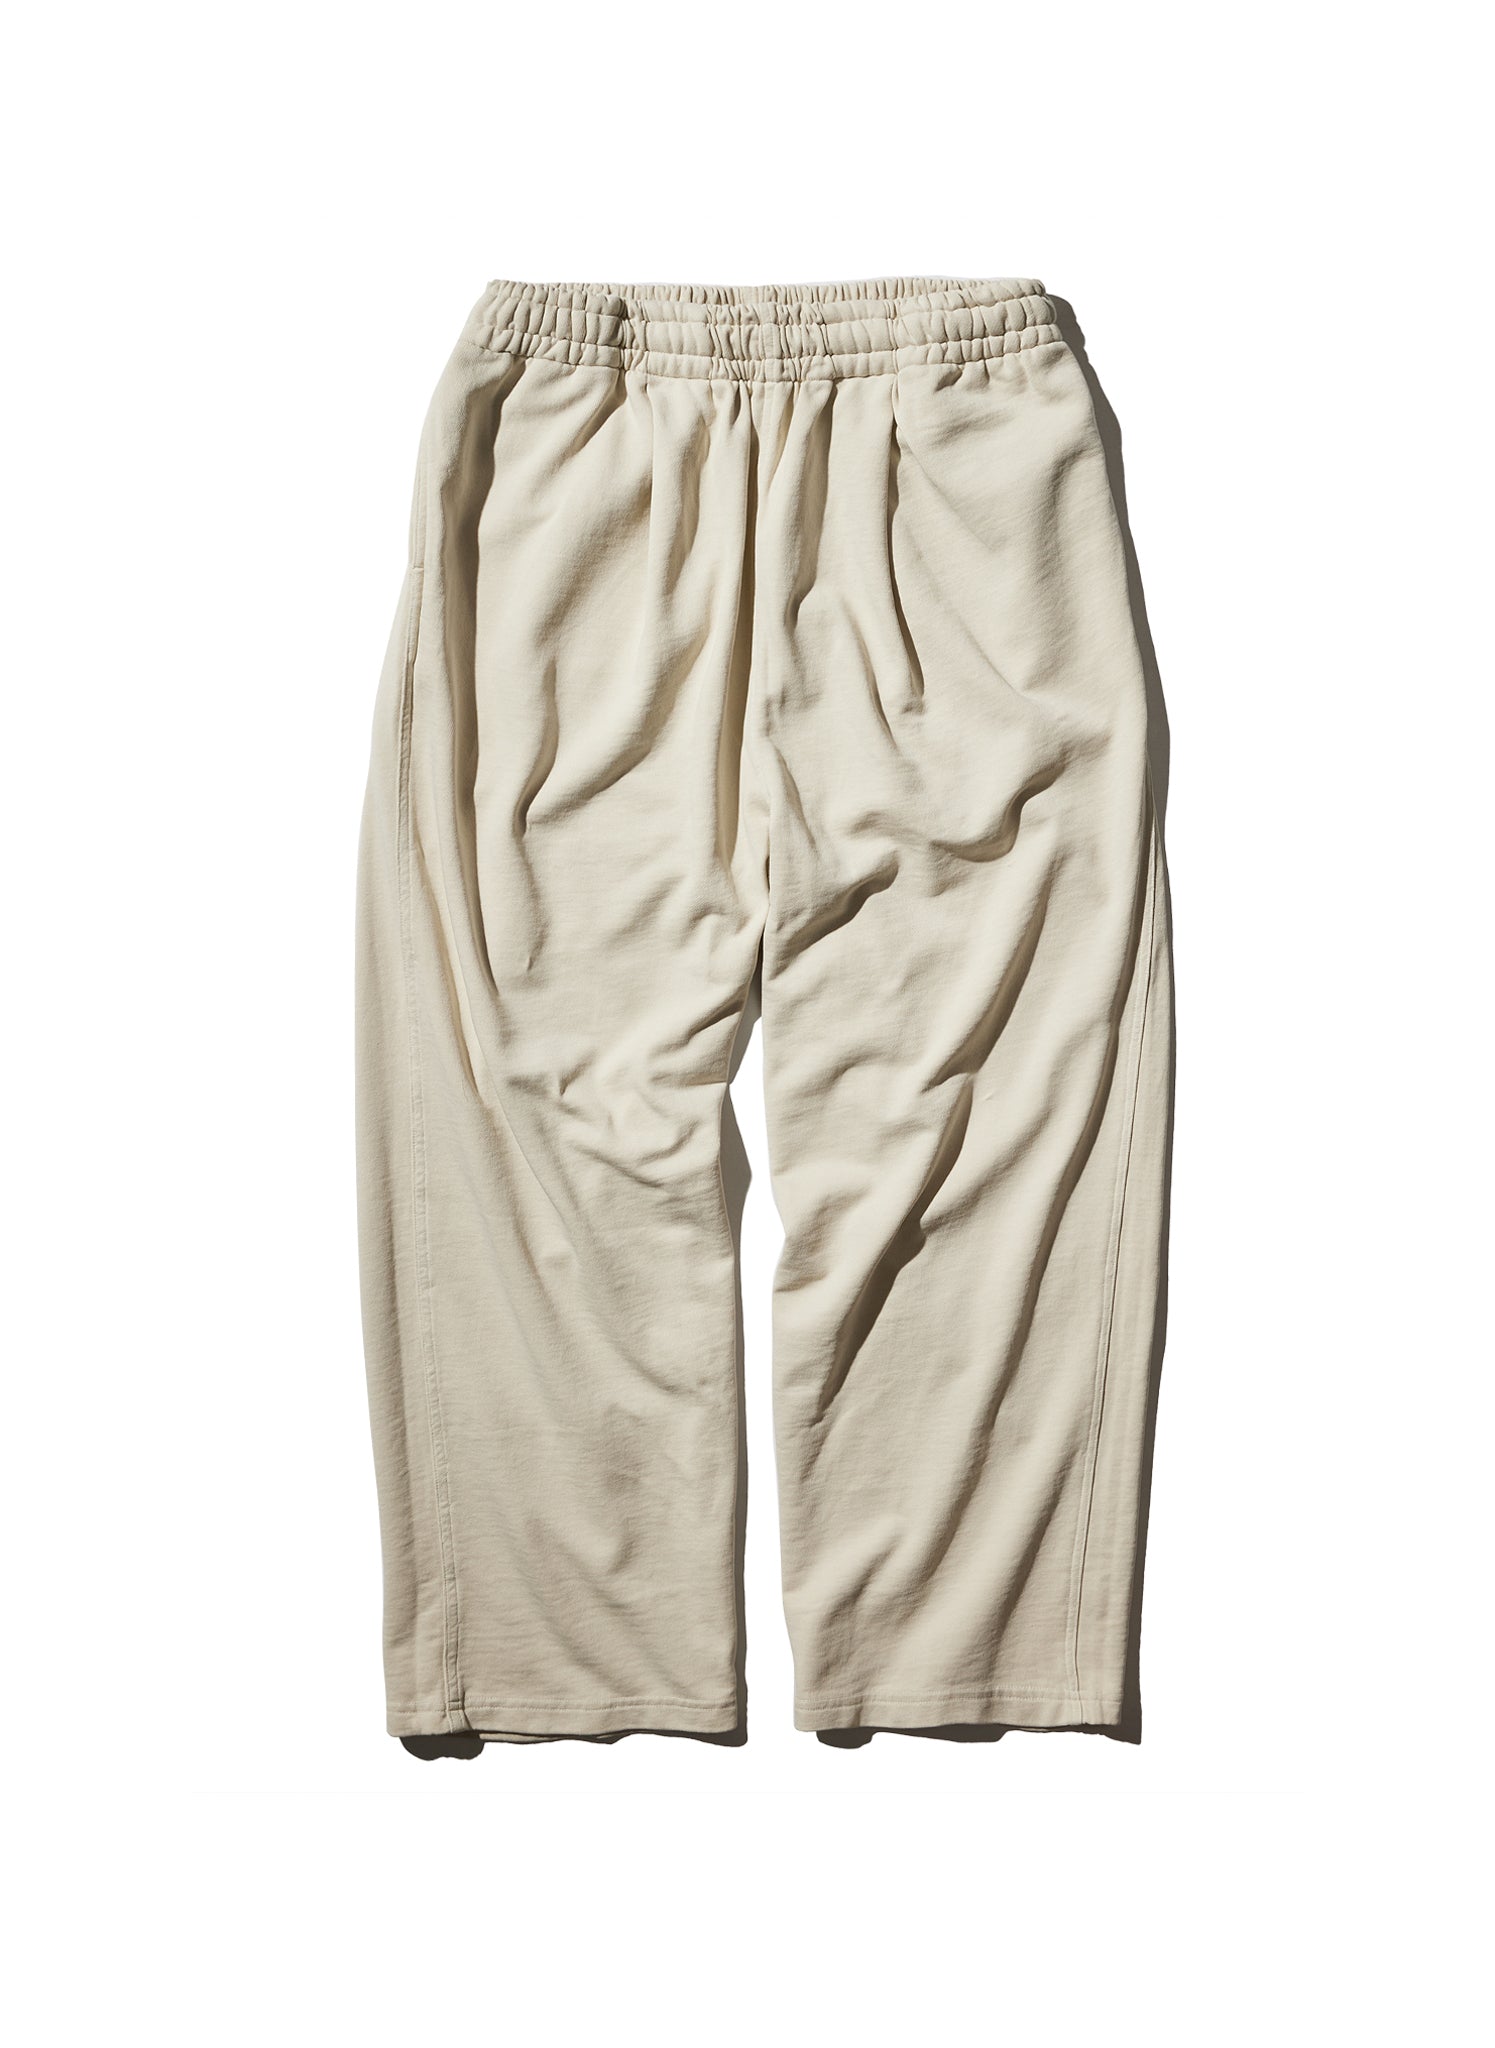 Willy Chavarria Northsider Sweat Pant